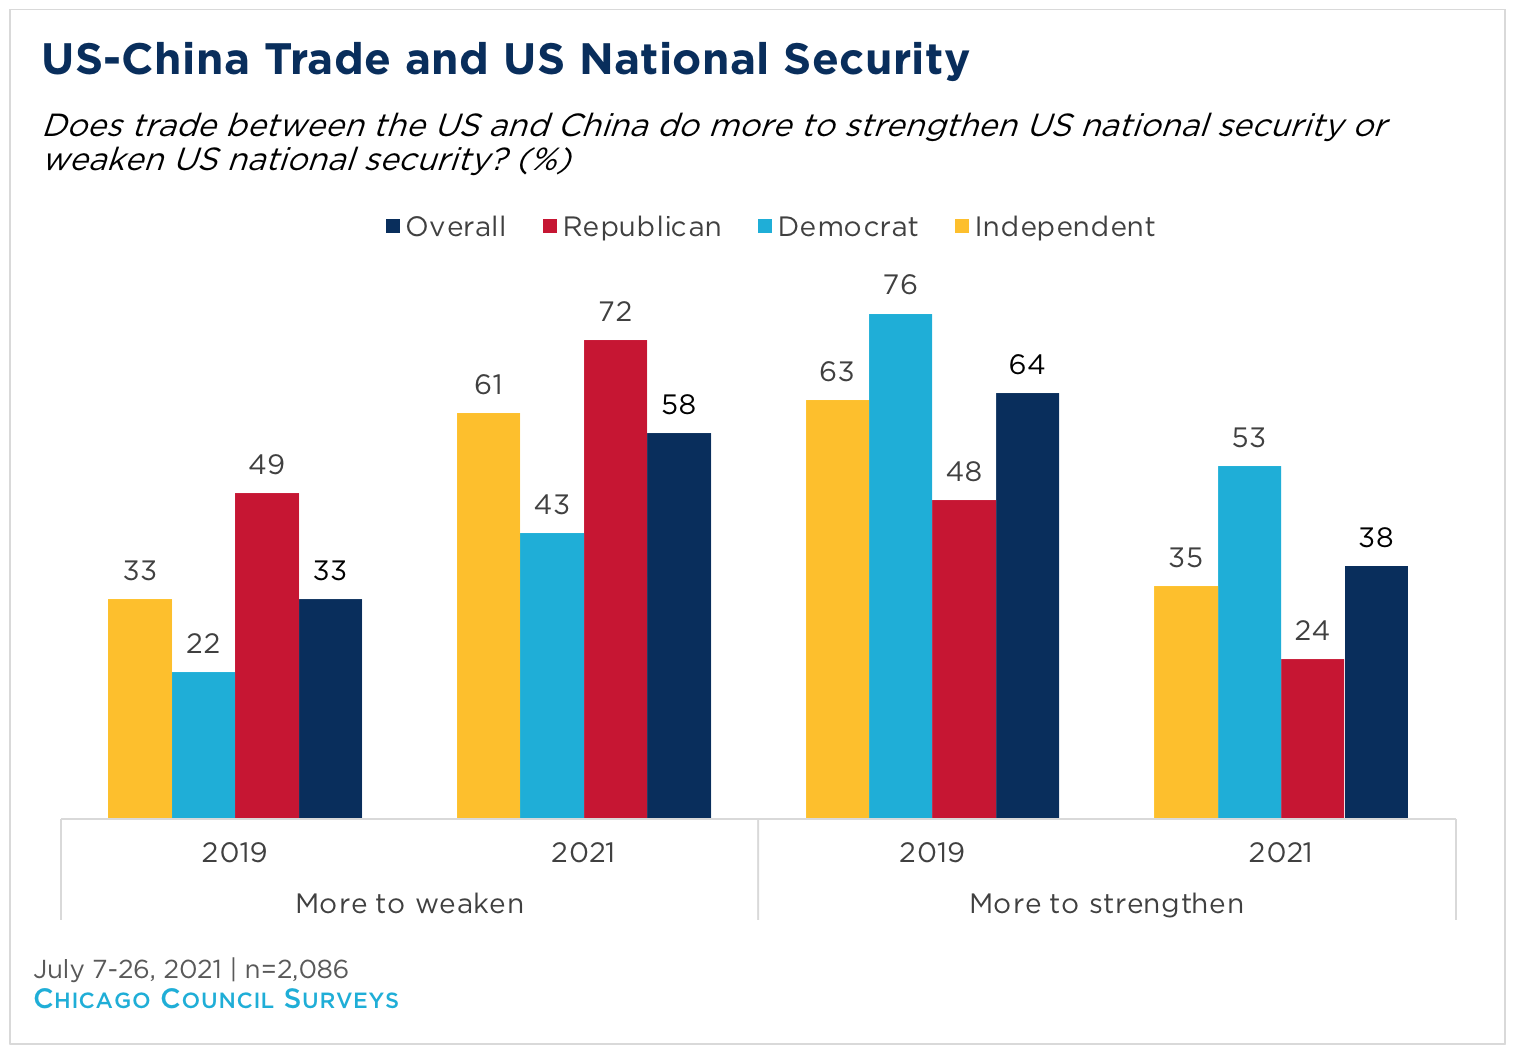 Bar graph showing opinion of US-China trade and national security